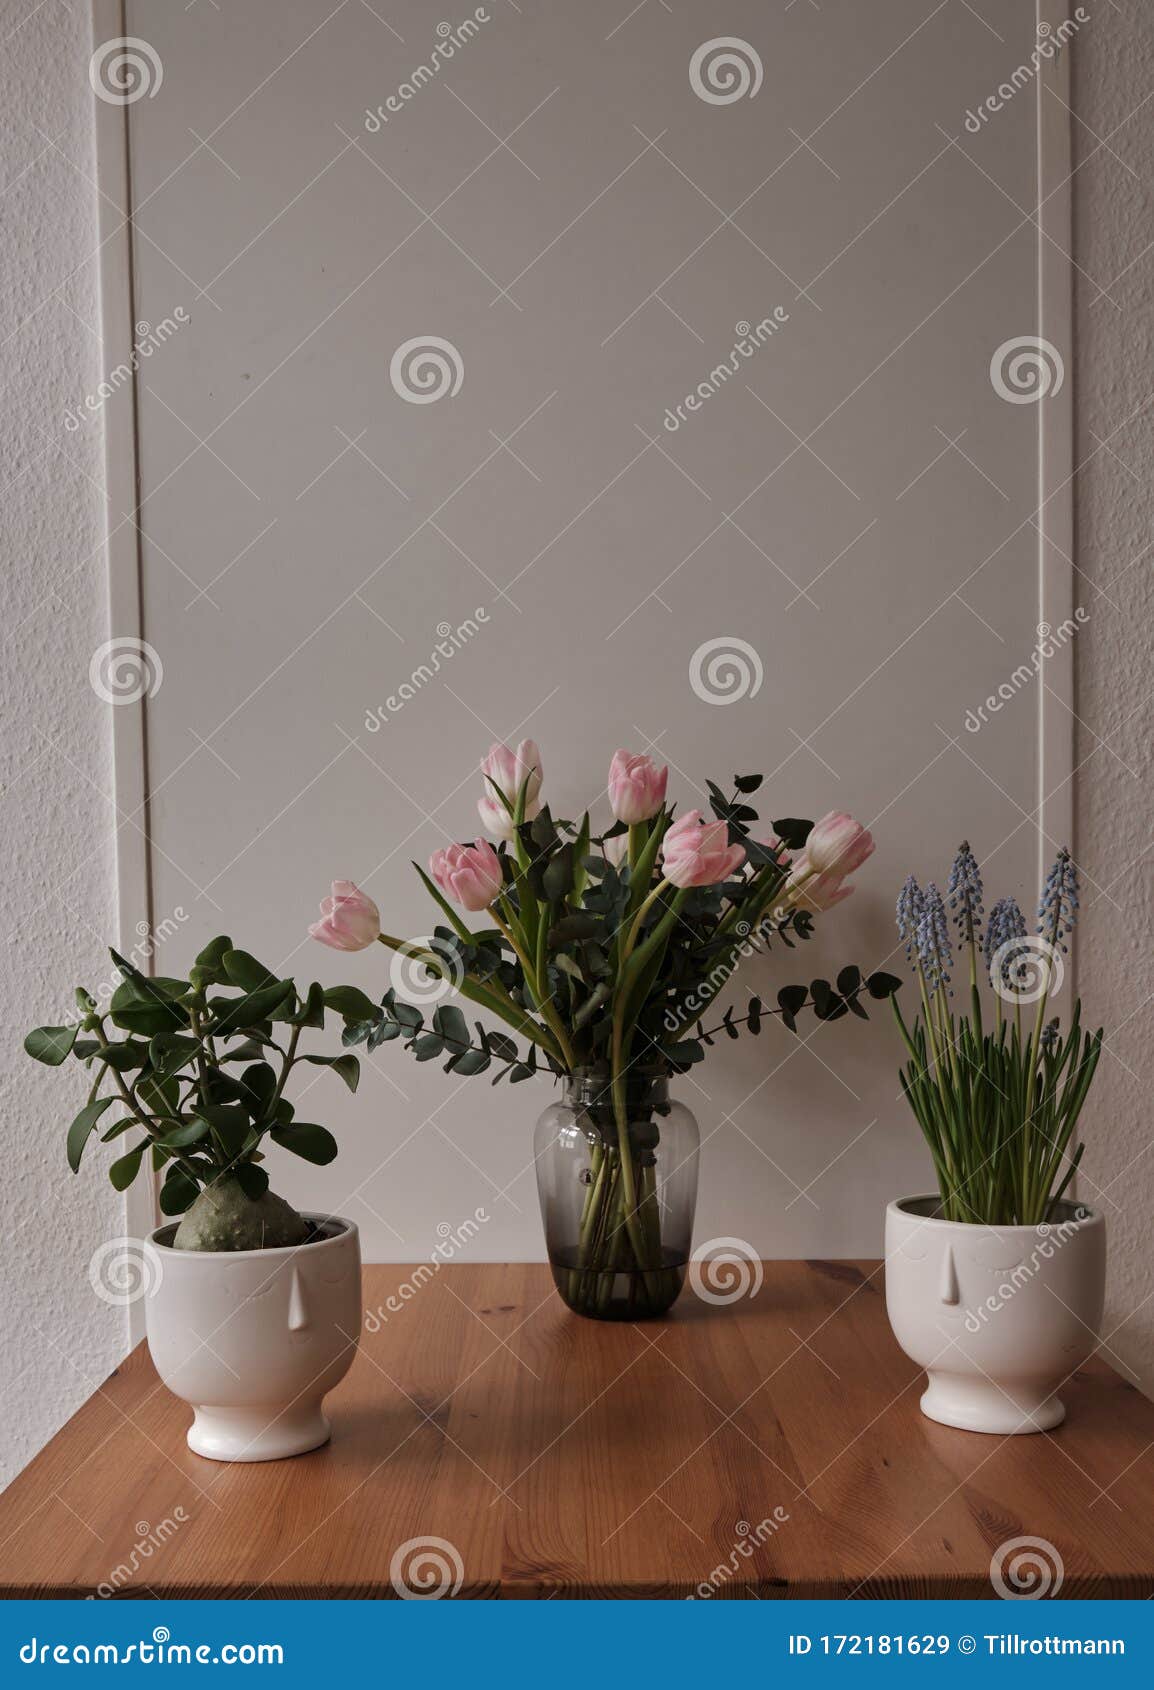 3 Flowers Stand On The Desk With Tulips In The Middle Stock Image